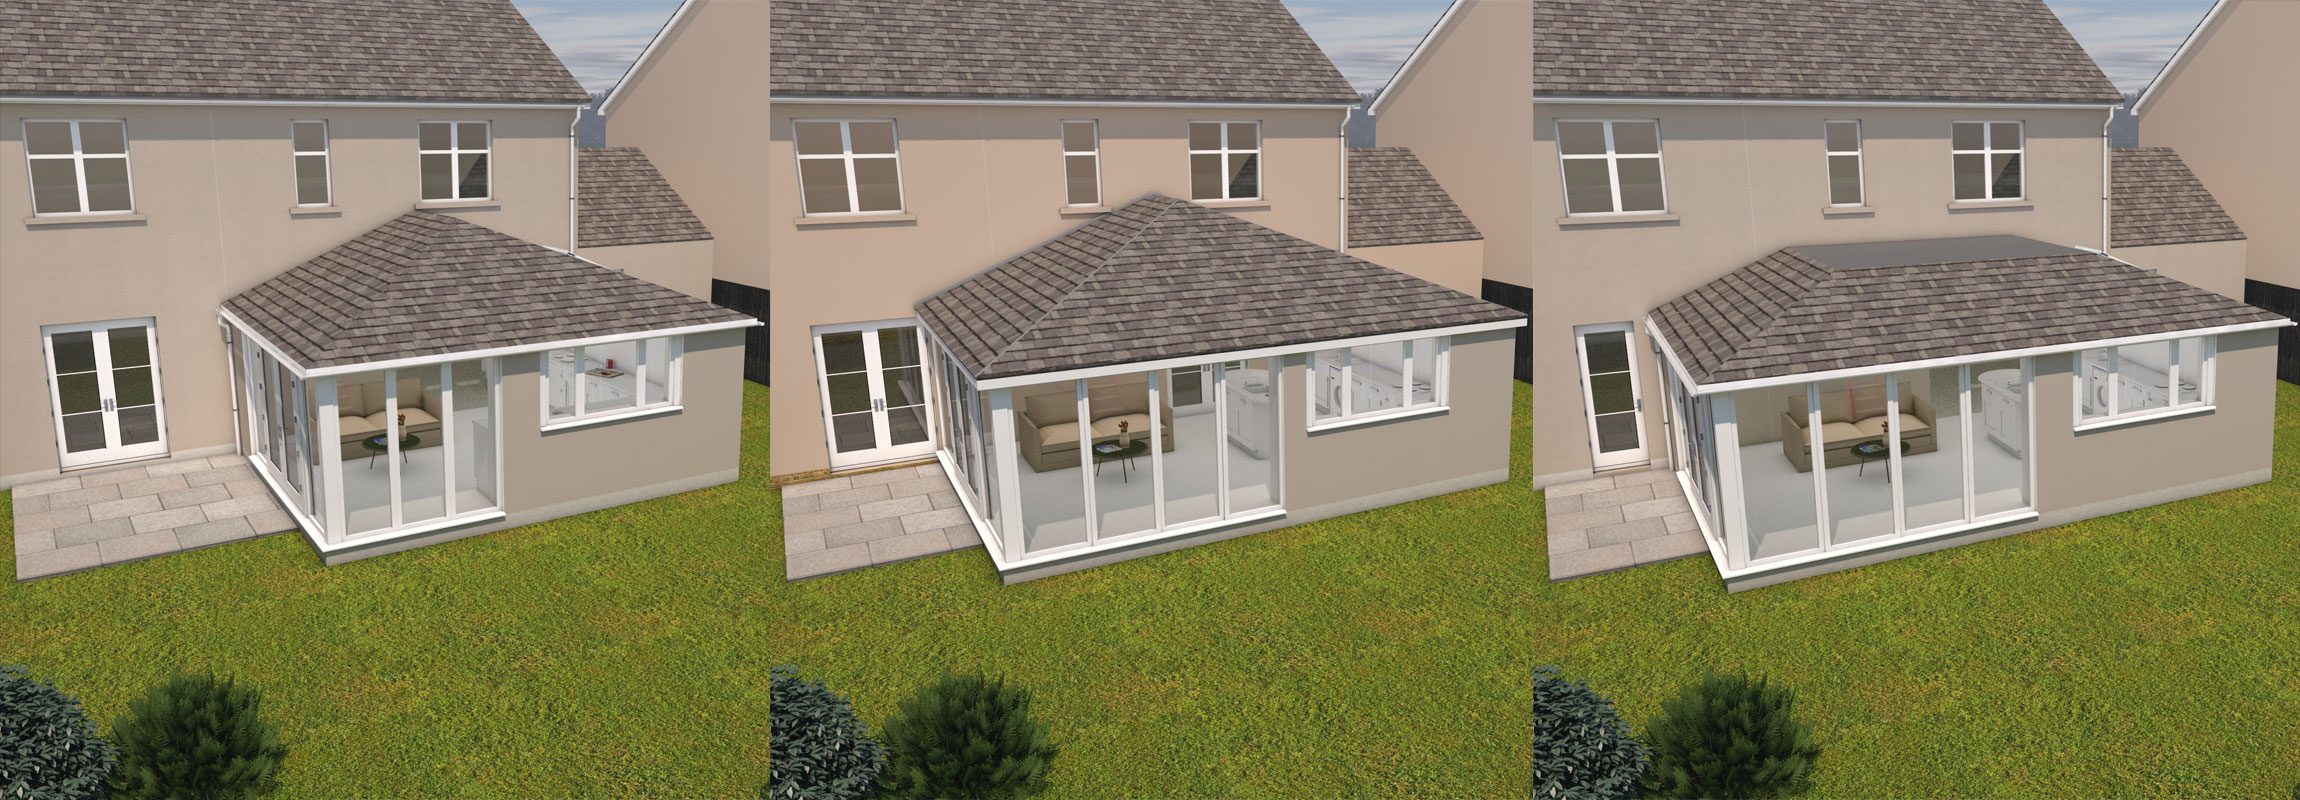 Thistle Home Extensions North East Scotland » FREE 3D Design Service